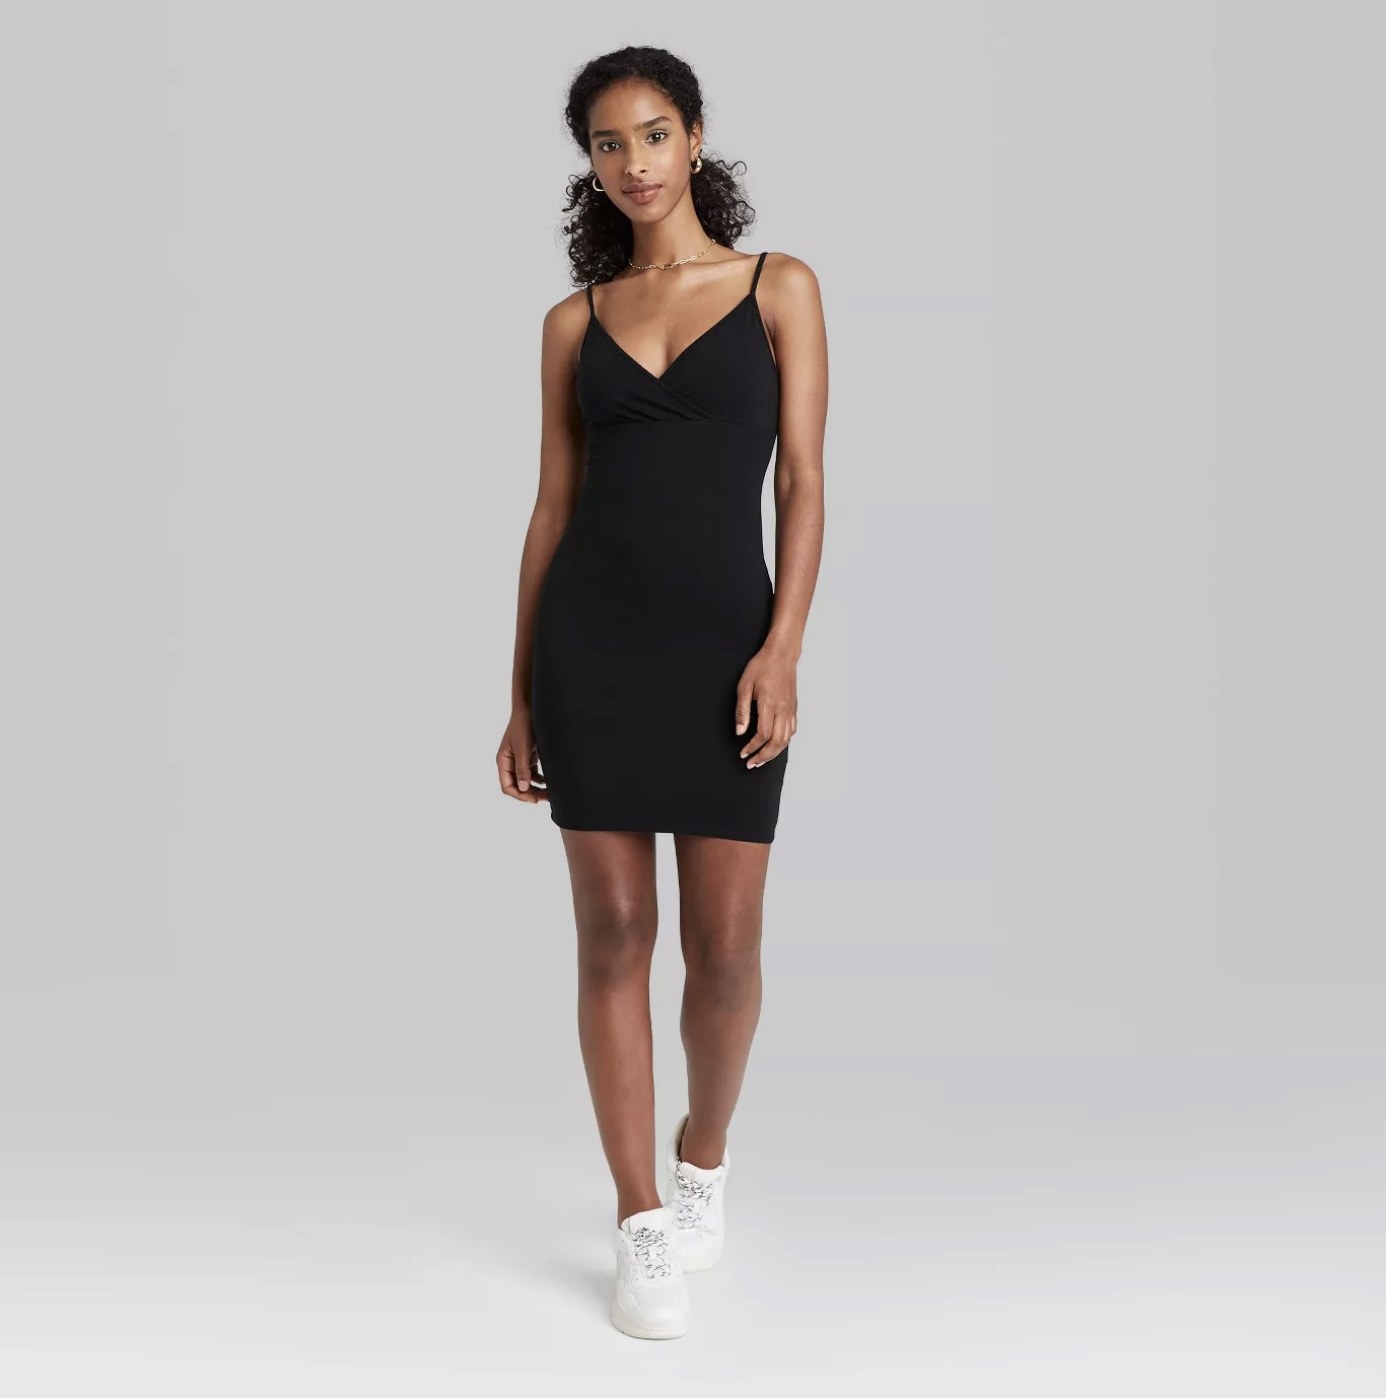 The black knit dress has a v-neck, spaghetti straps and falls mid-thigh